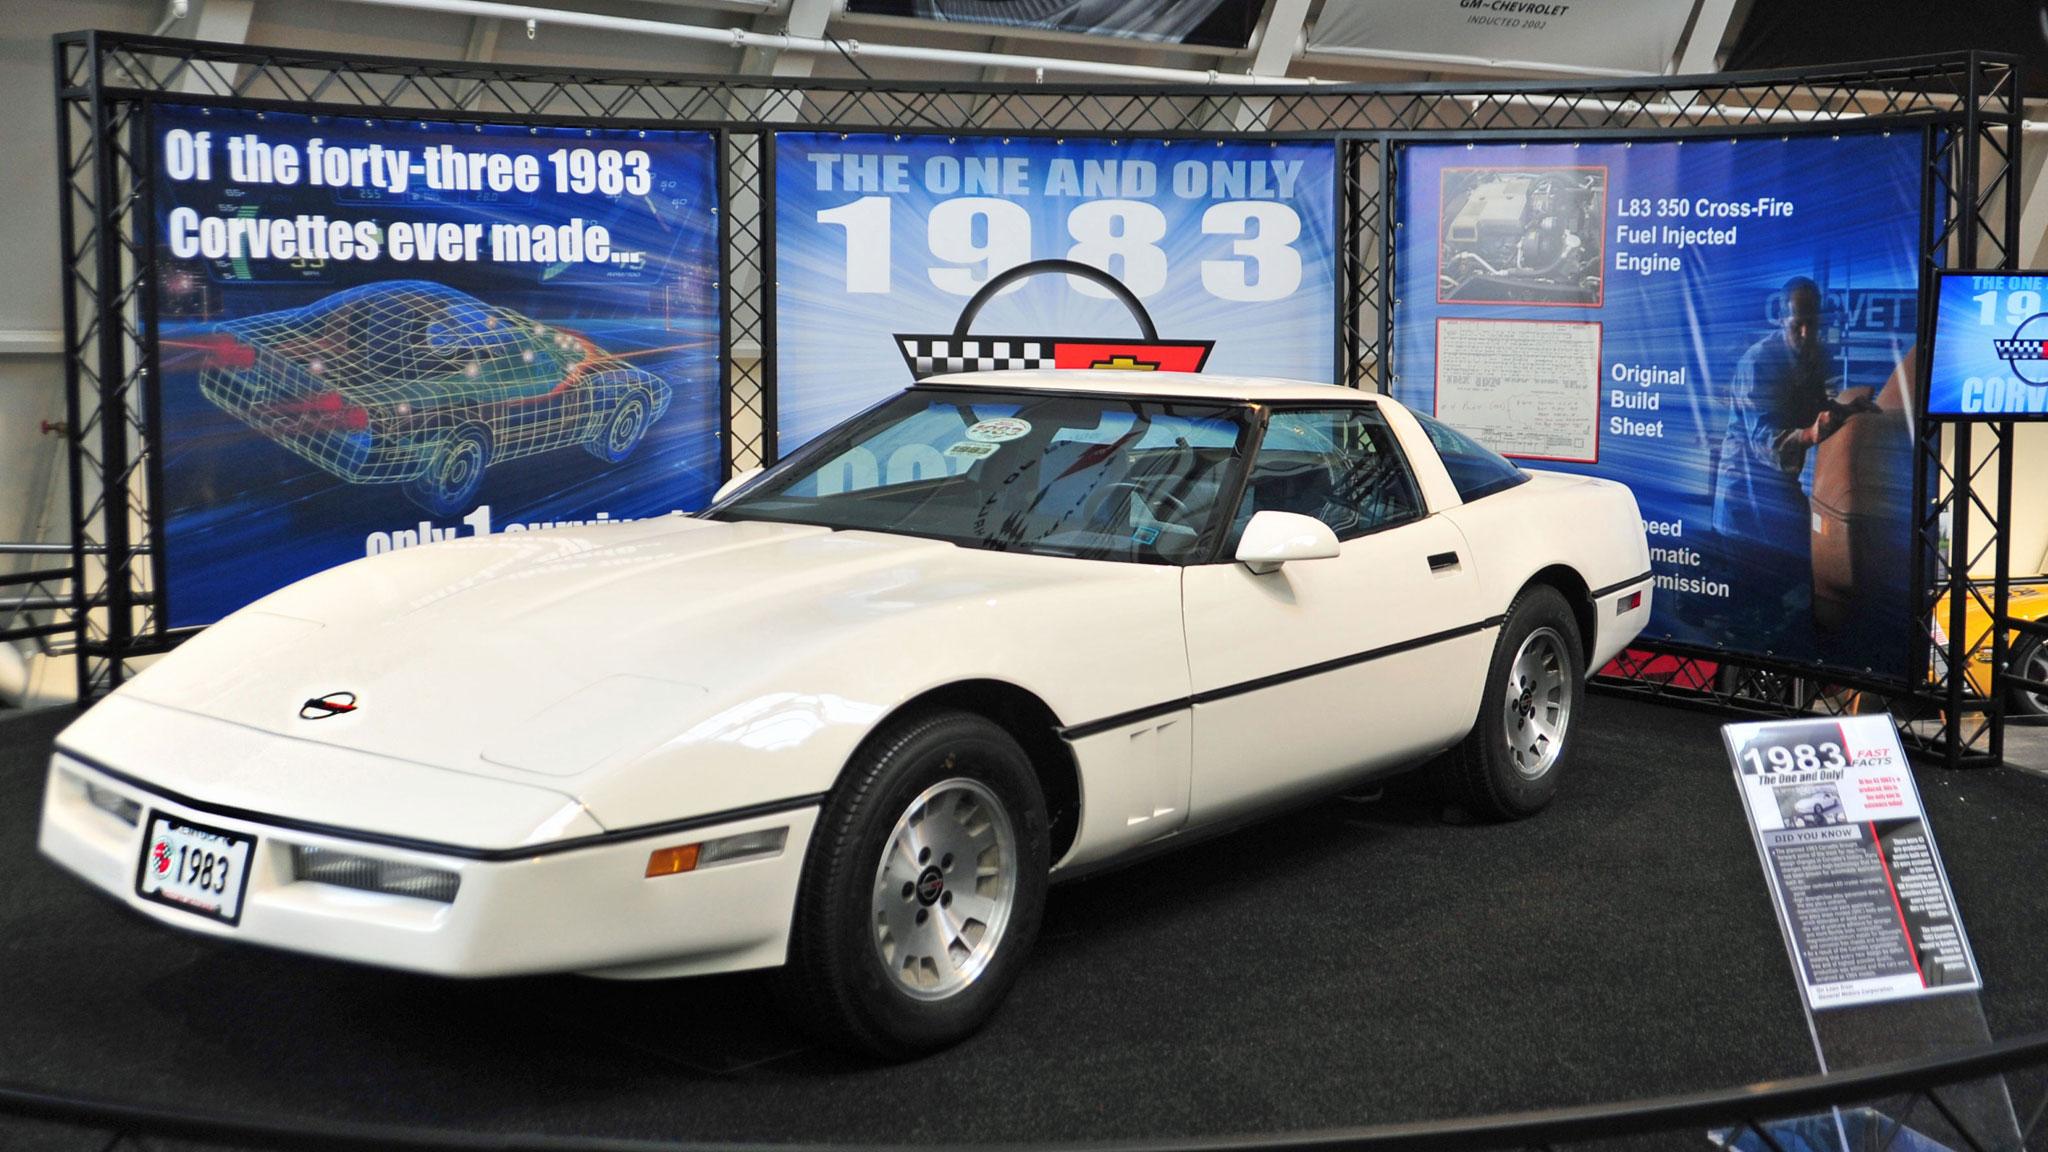 Why There's No Such Thing as a 1983 Corvette